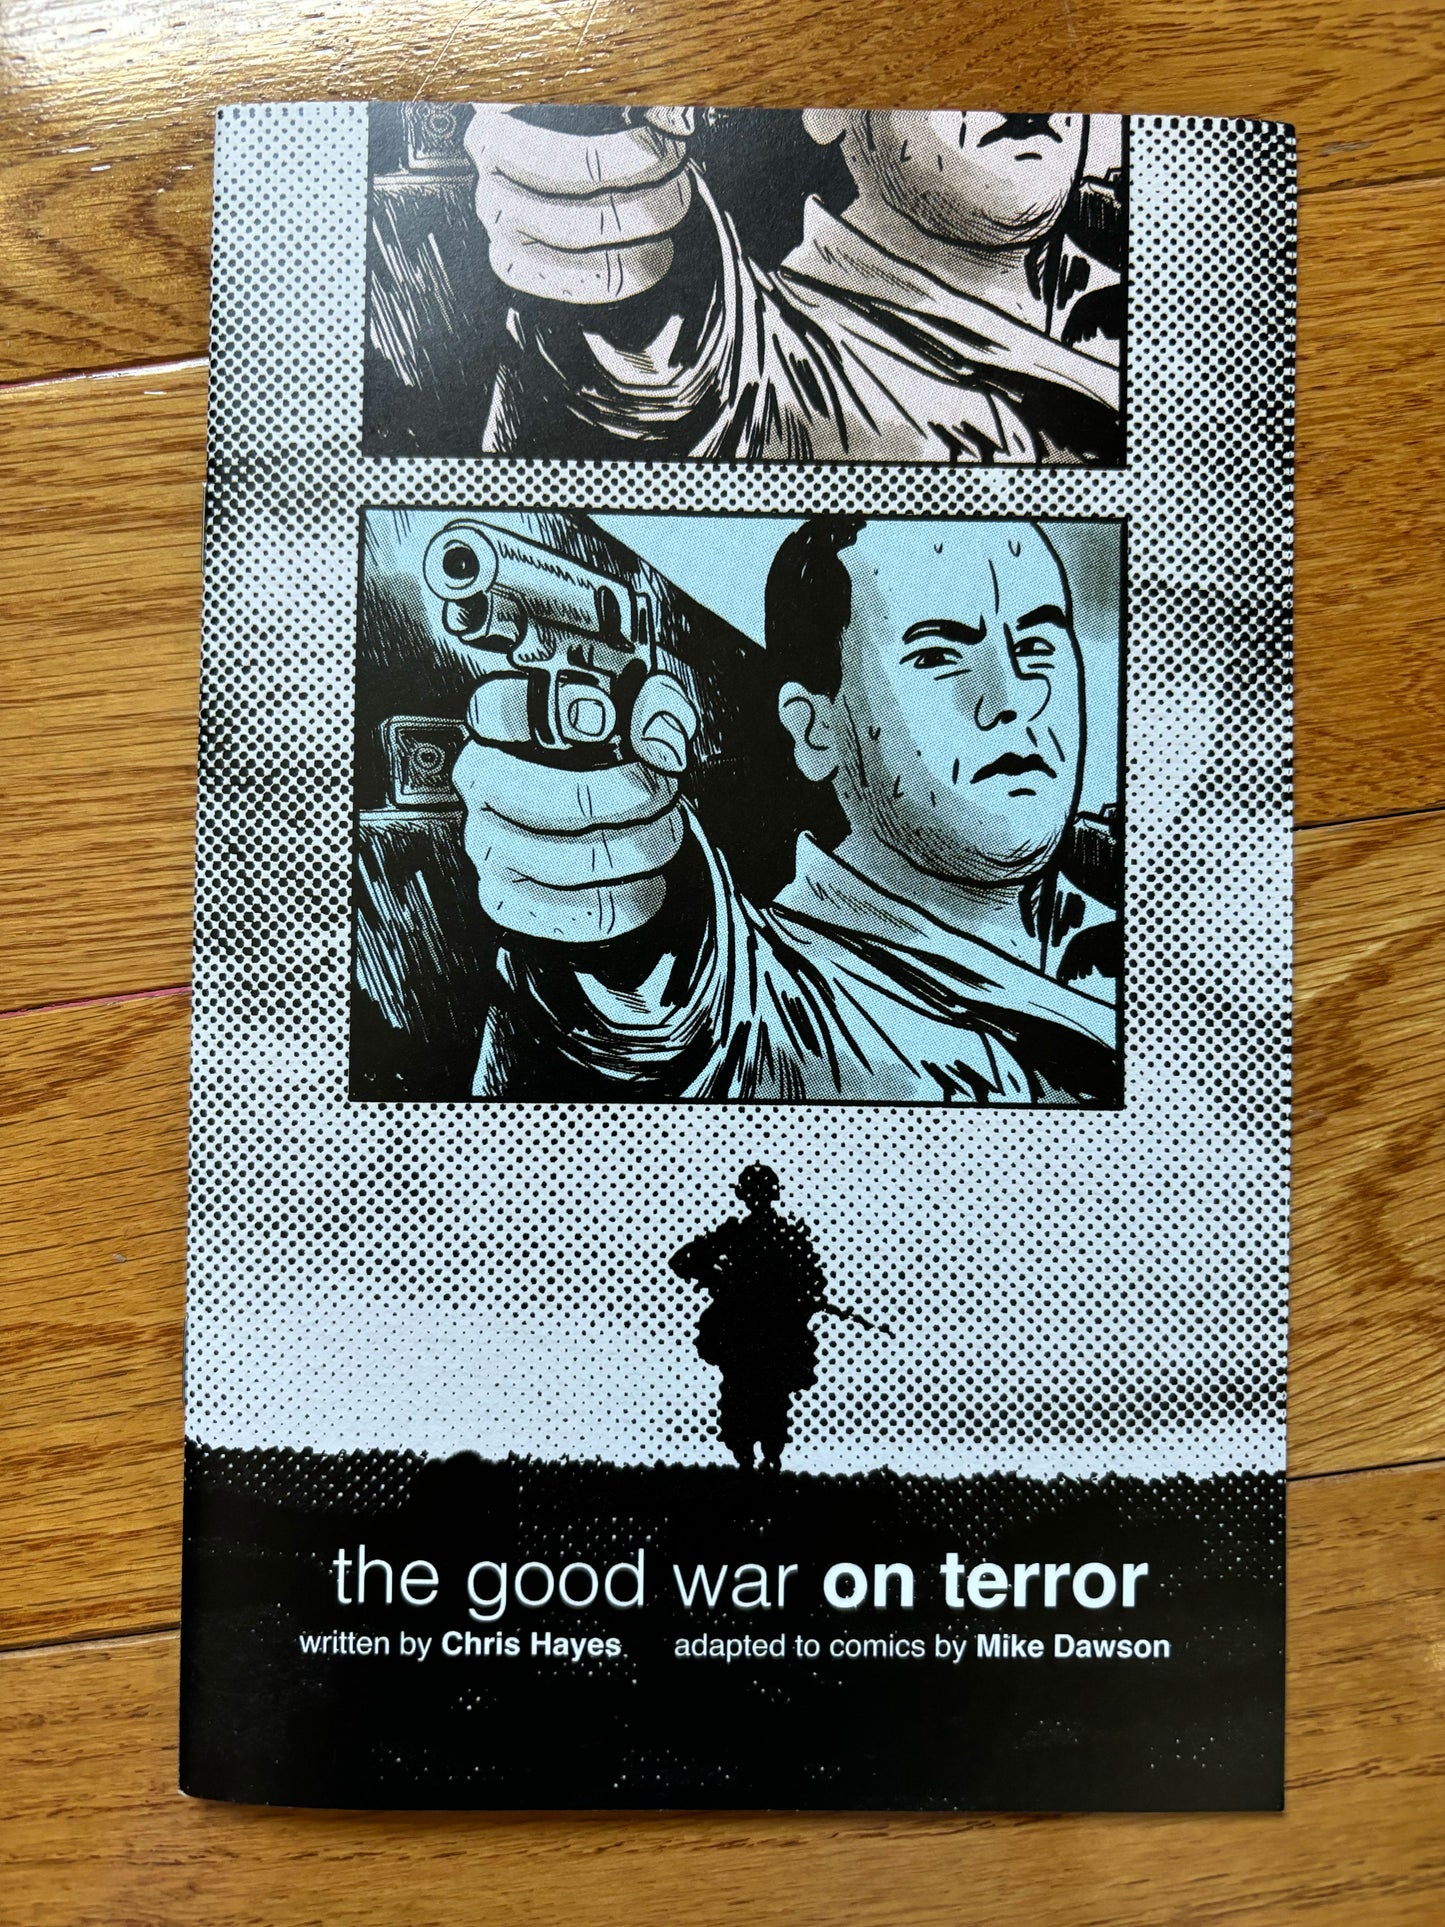 THE GOOD WAR ON TERROR - WRITTEN BY CHRISTOPHER HAYES